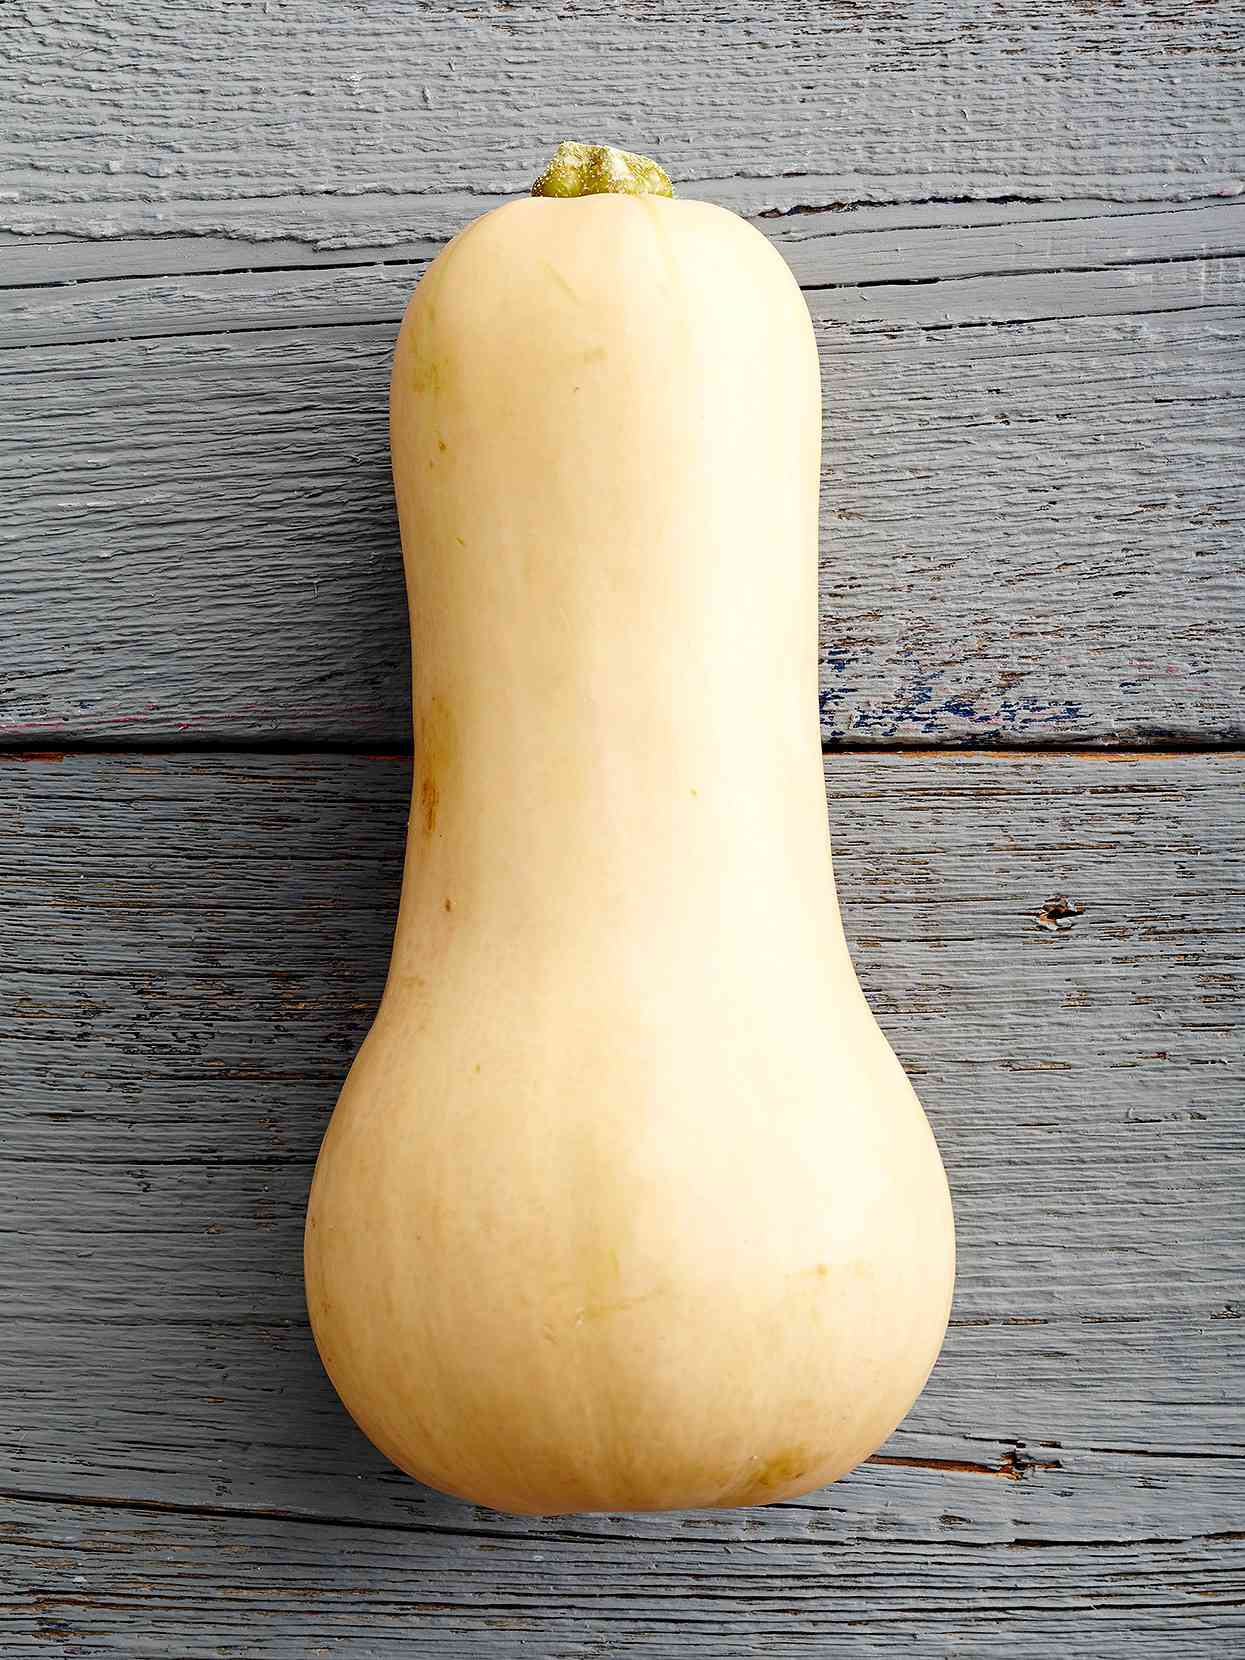 butternut squash on gray wood background